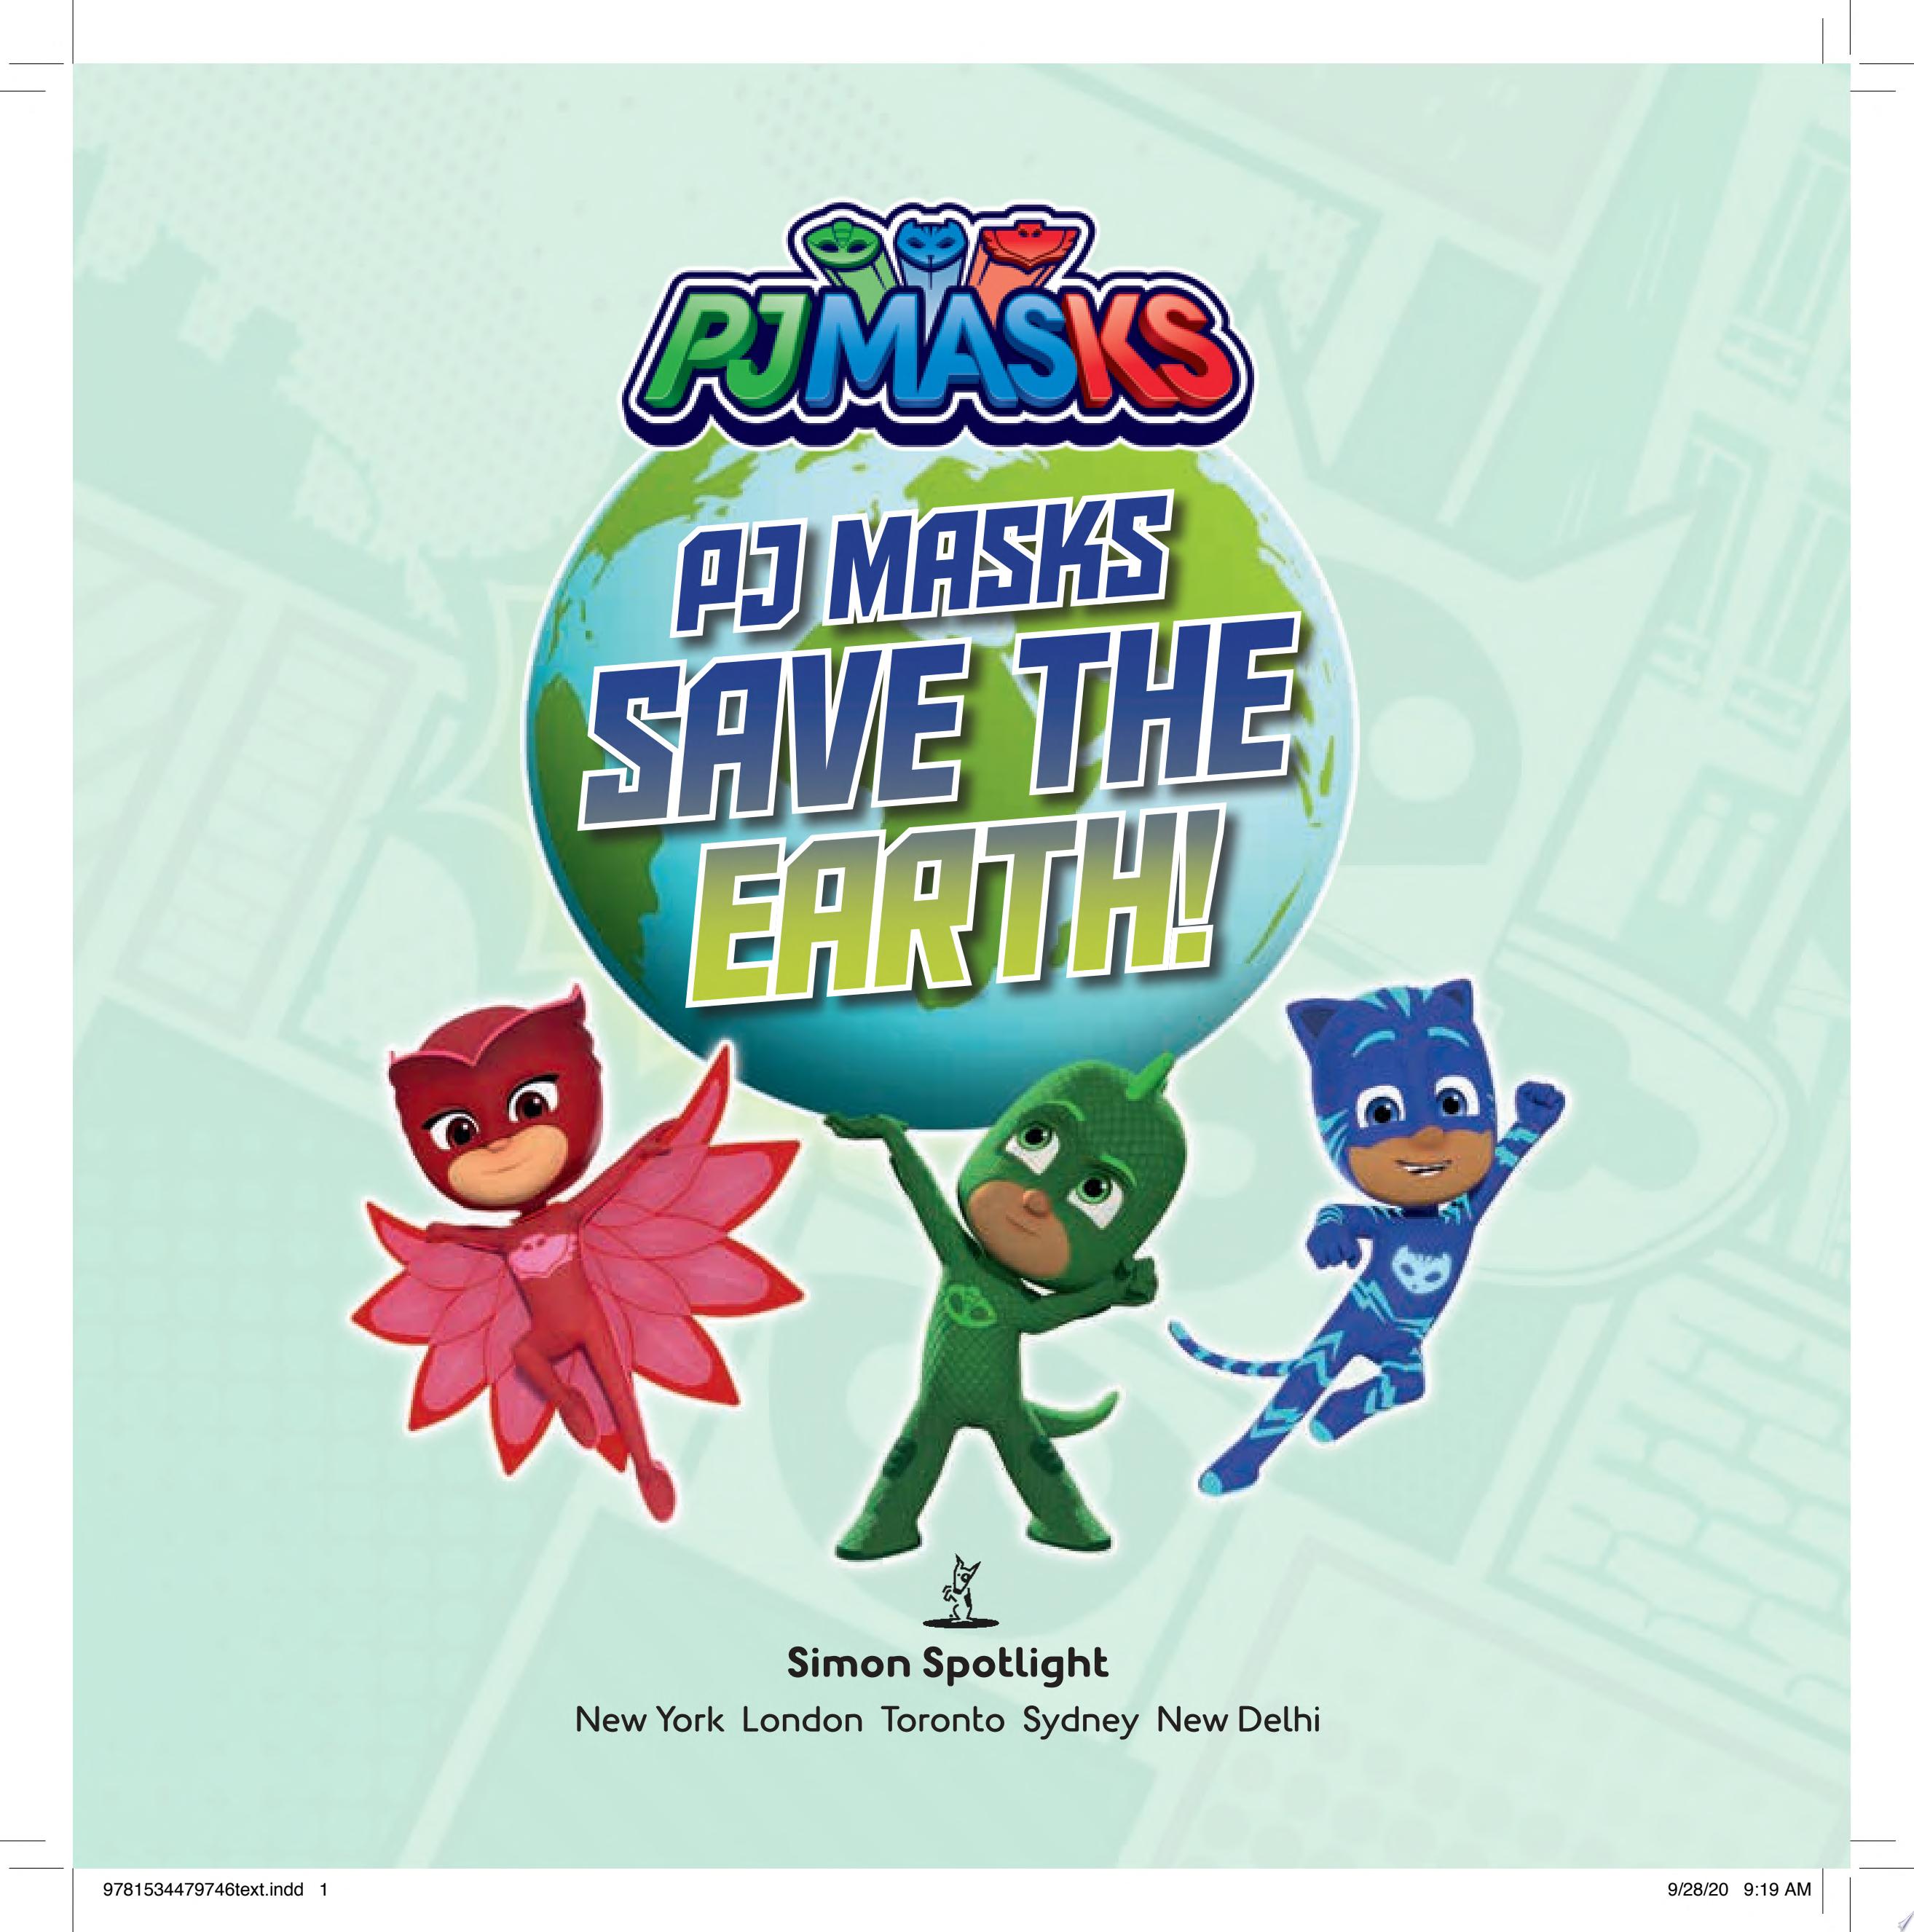 Image for "PJ Masks Save the Earth!"